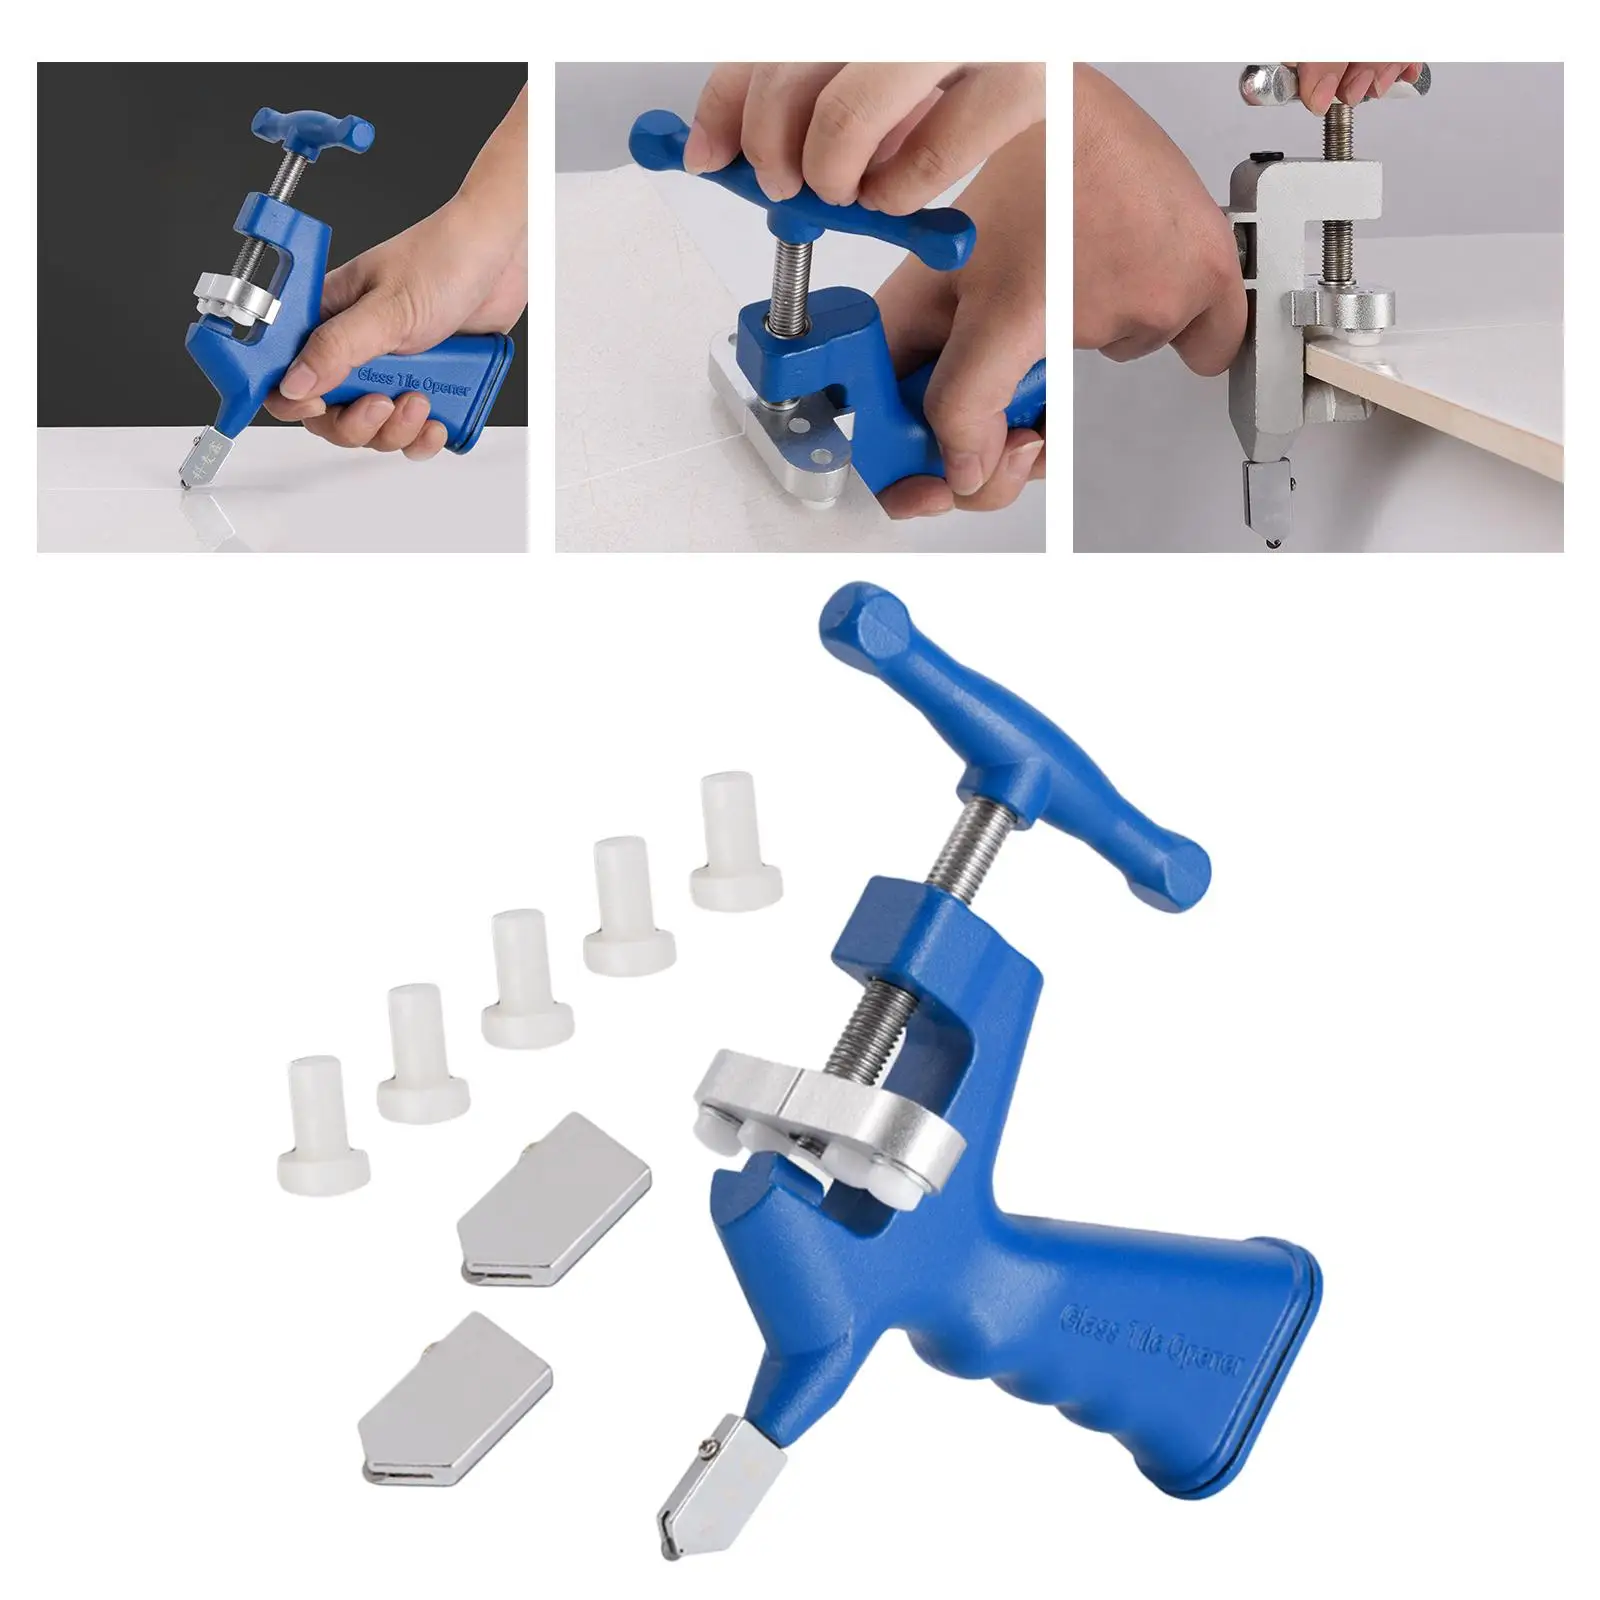  Glass Cutter Tool Portable  with Breaking Pliers Roller  Professional Opener for Windows, Tile, Mirror, Cutting Tool Mosaic